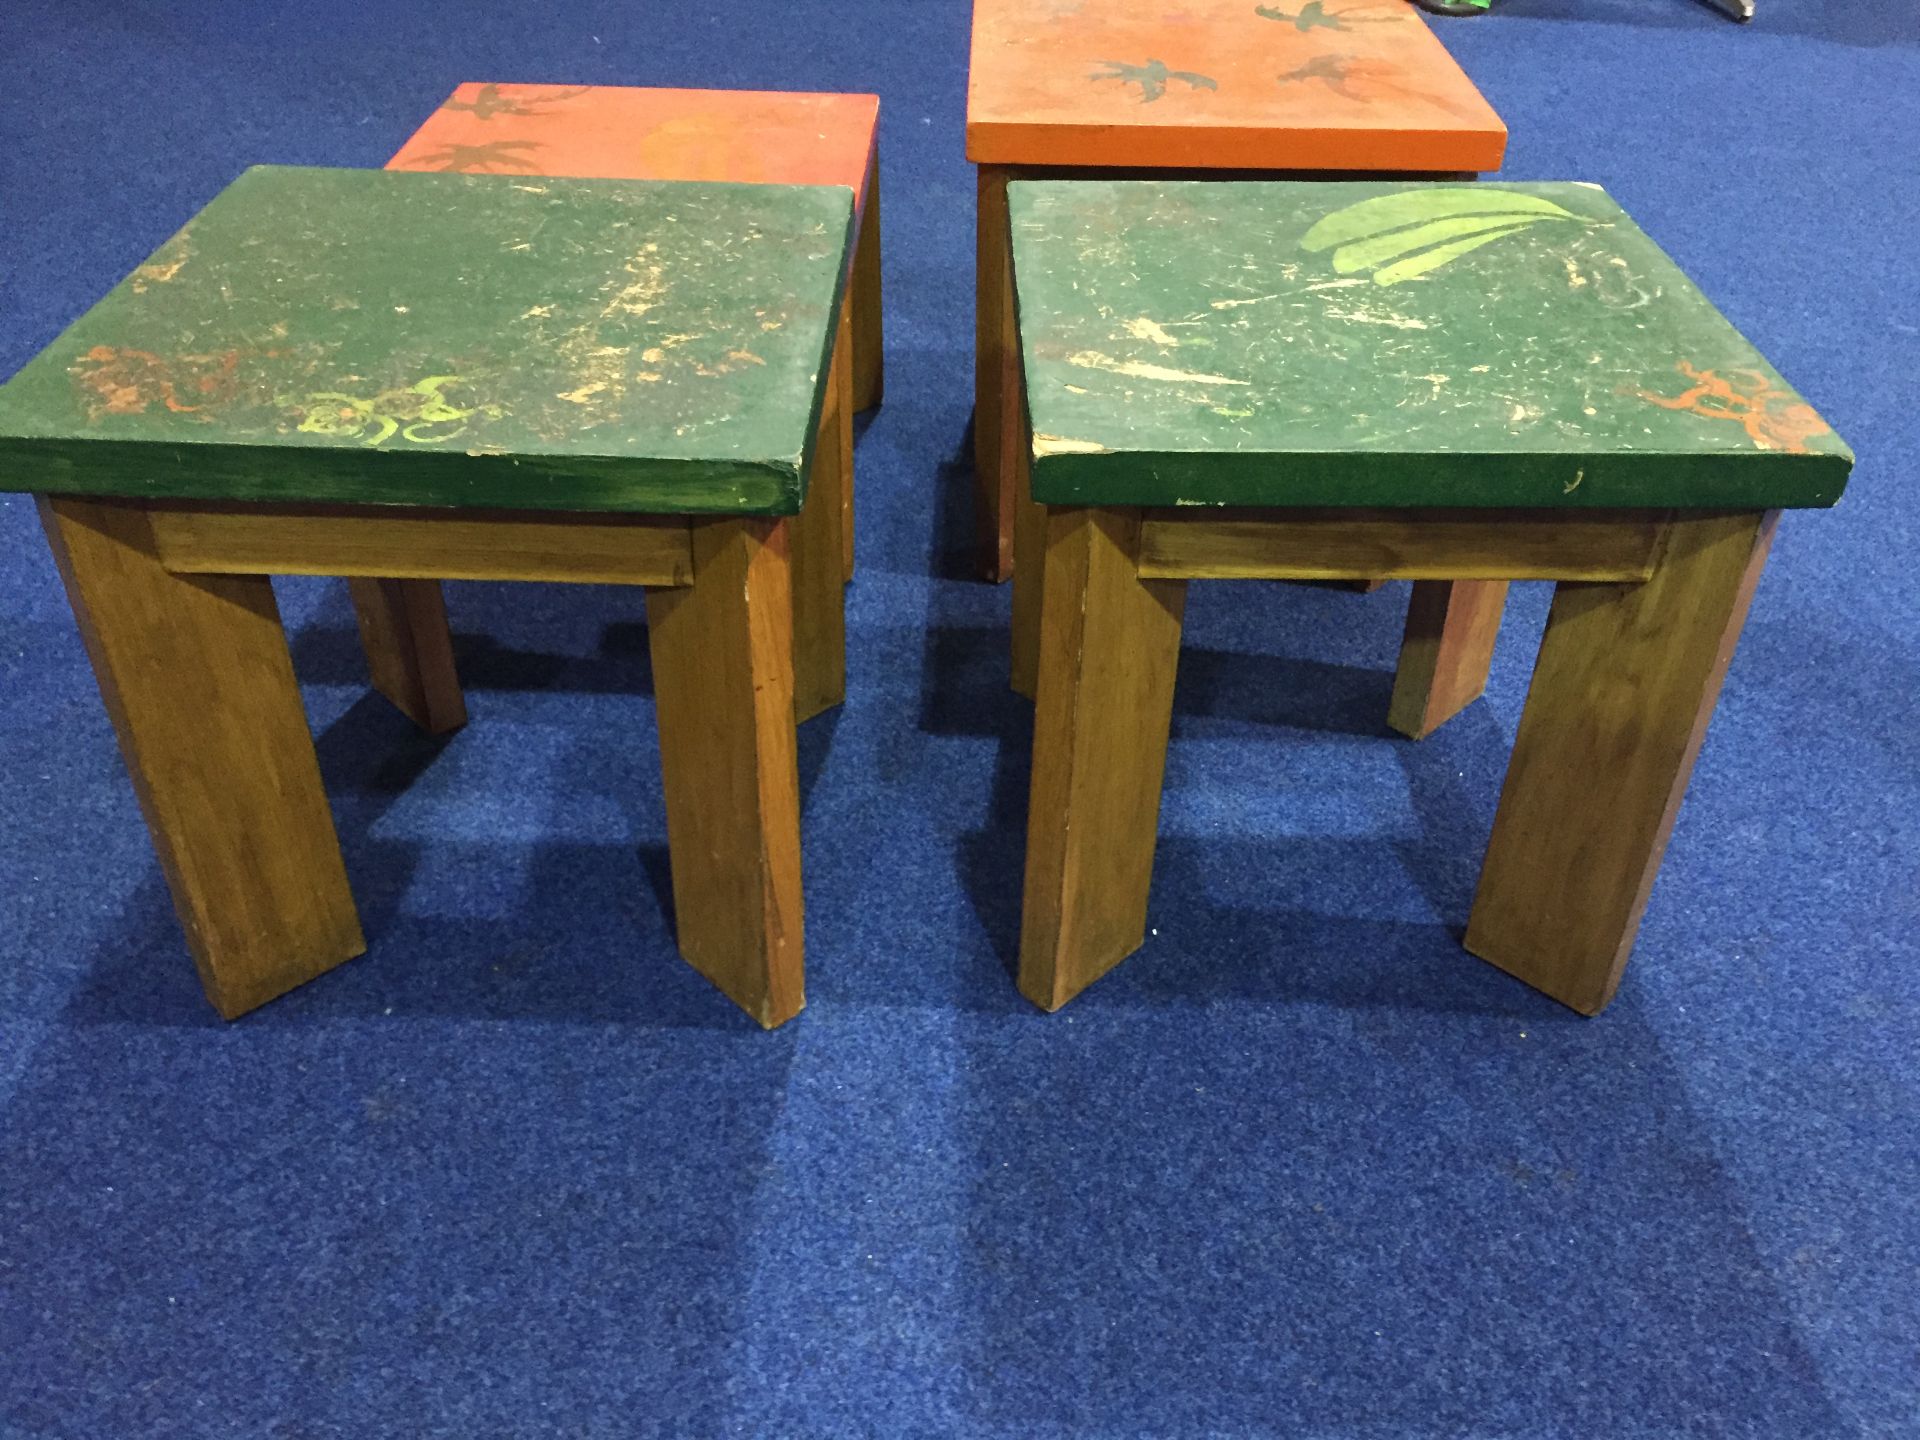 4 Wooden Tables - Image 3 of 4